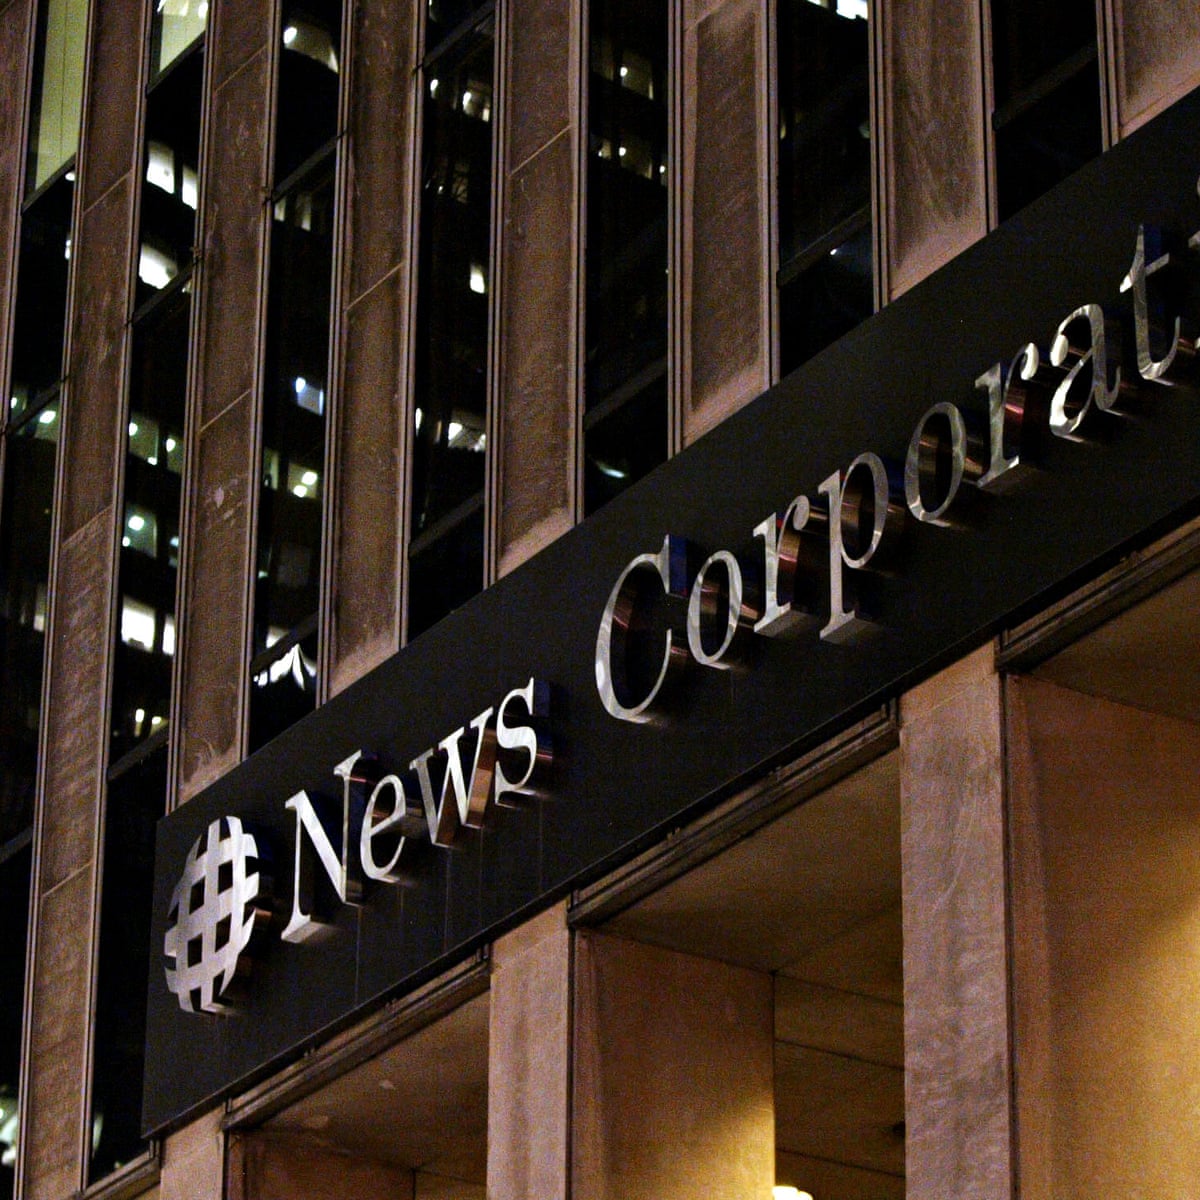 News Corp posts US$1.5bn loss driven by sharp declines in newspaper revenue | News Corporation | The Guardian